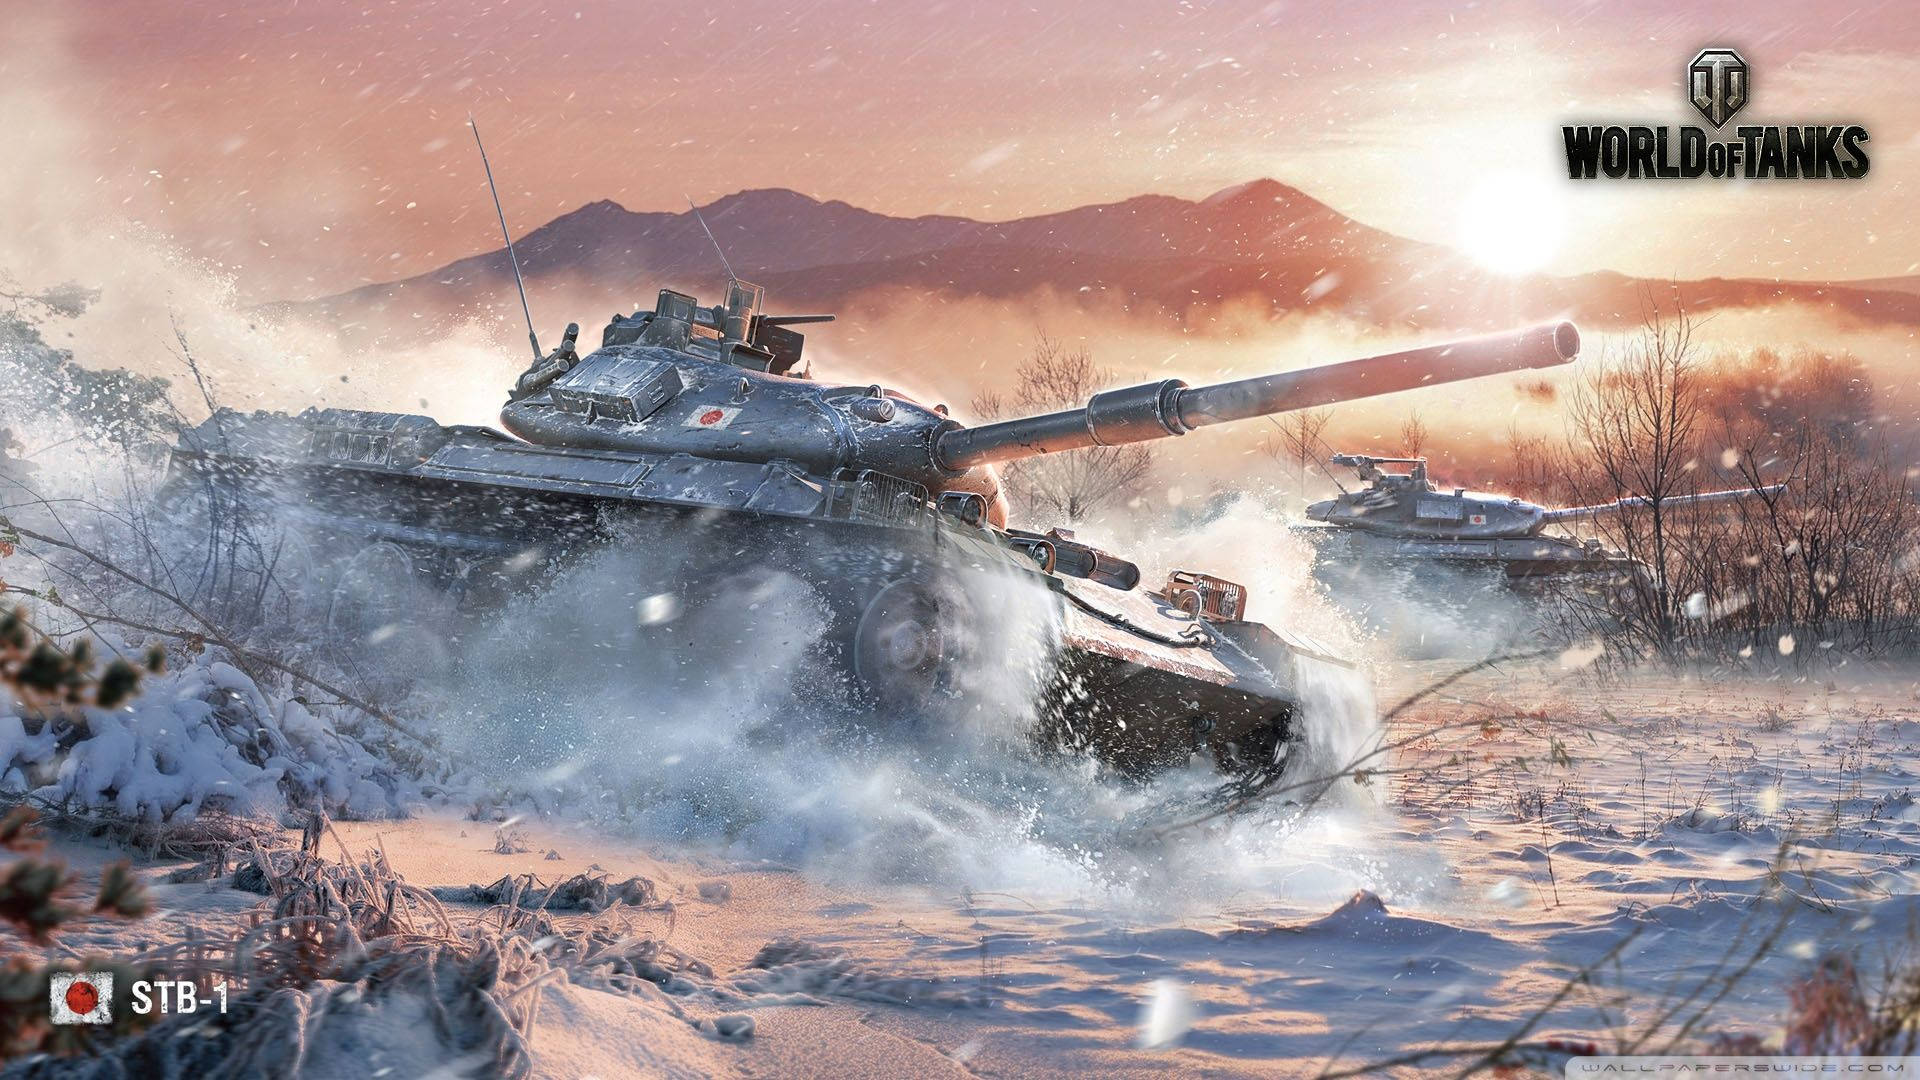 Dominant Display Of The Stb-1 In World Of Tanks Wallpaper